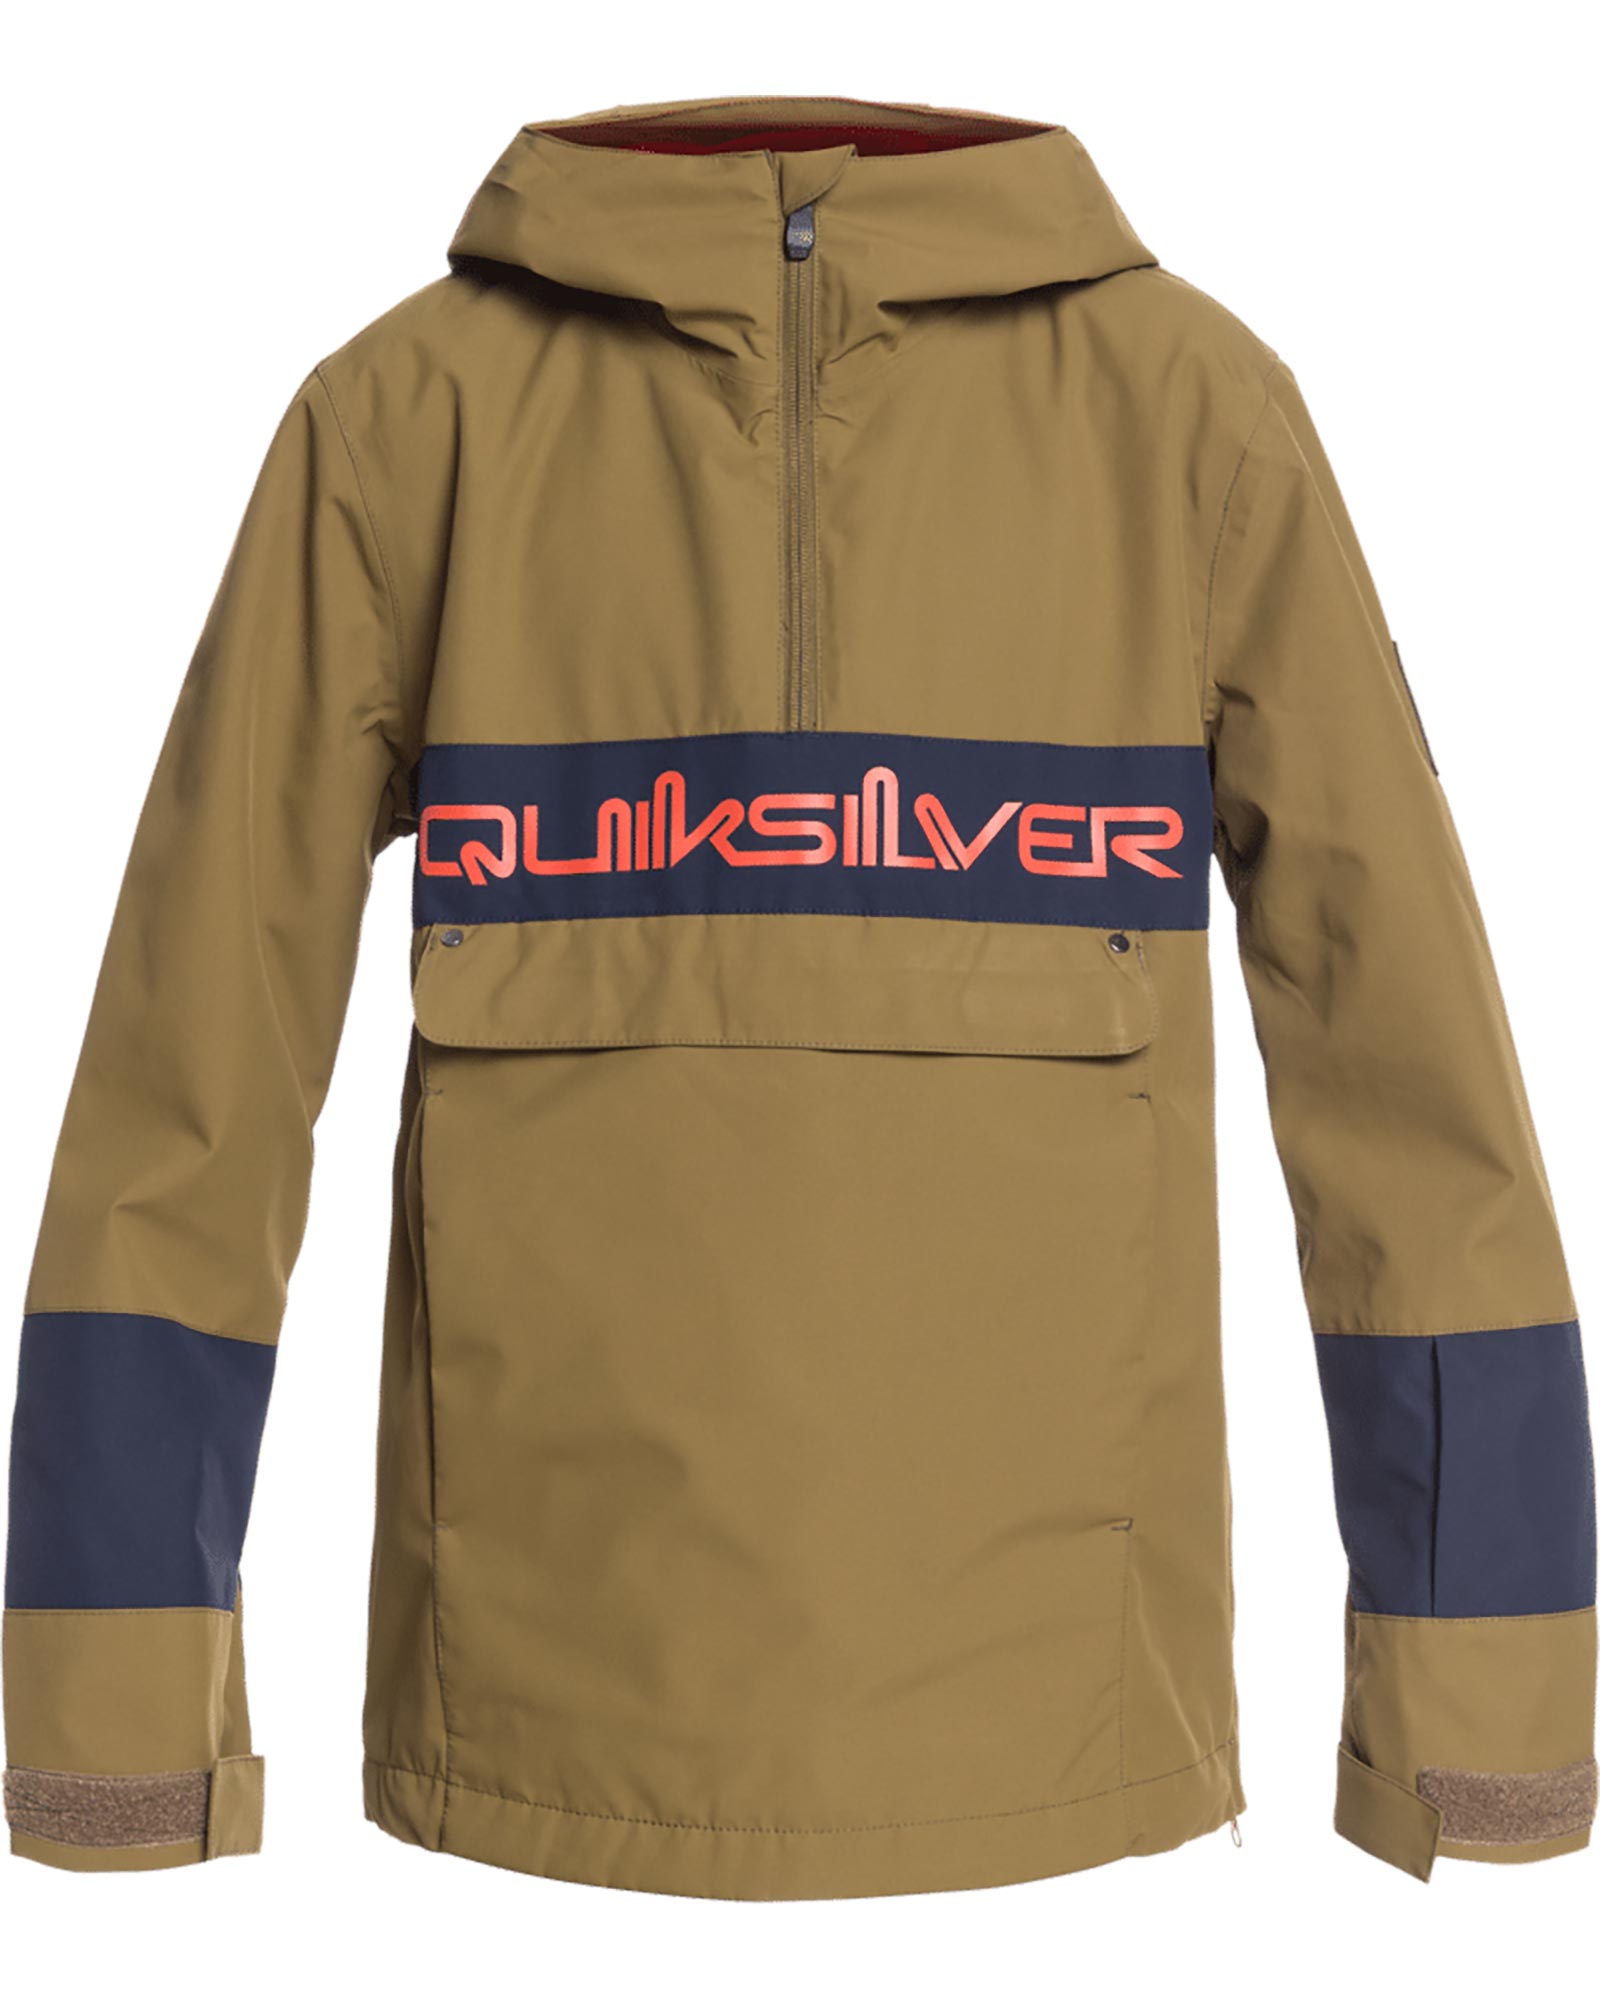 Quiksilver Steeze Boys’ Jacket K14 - Military Olive 14 Years